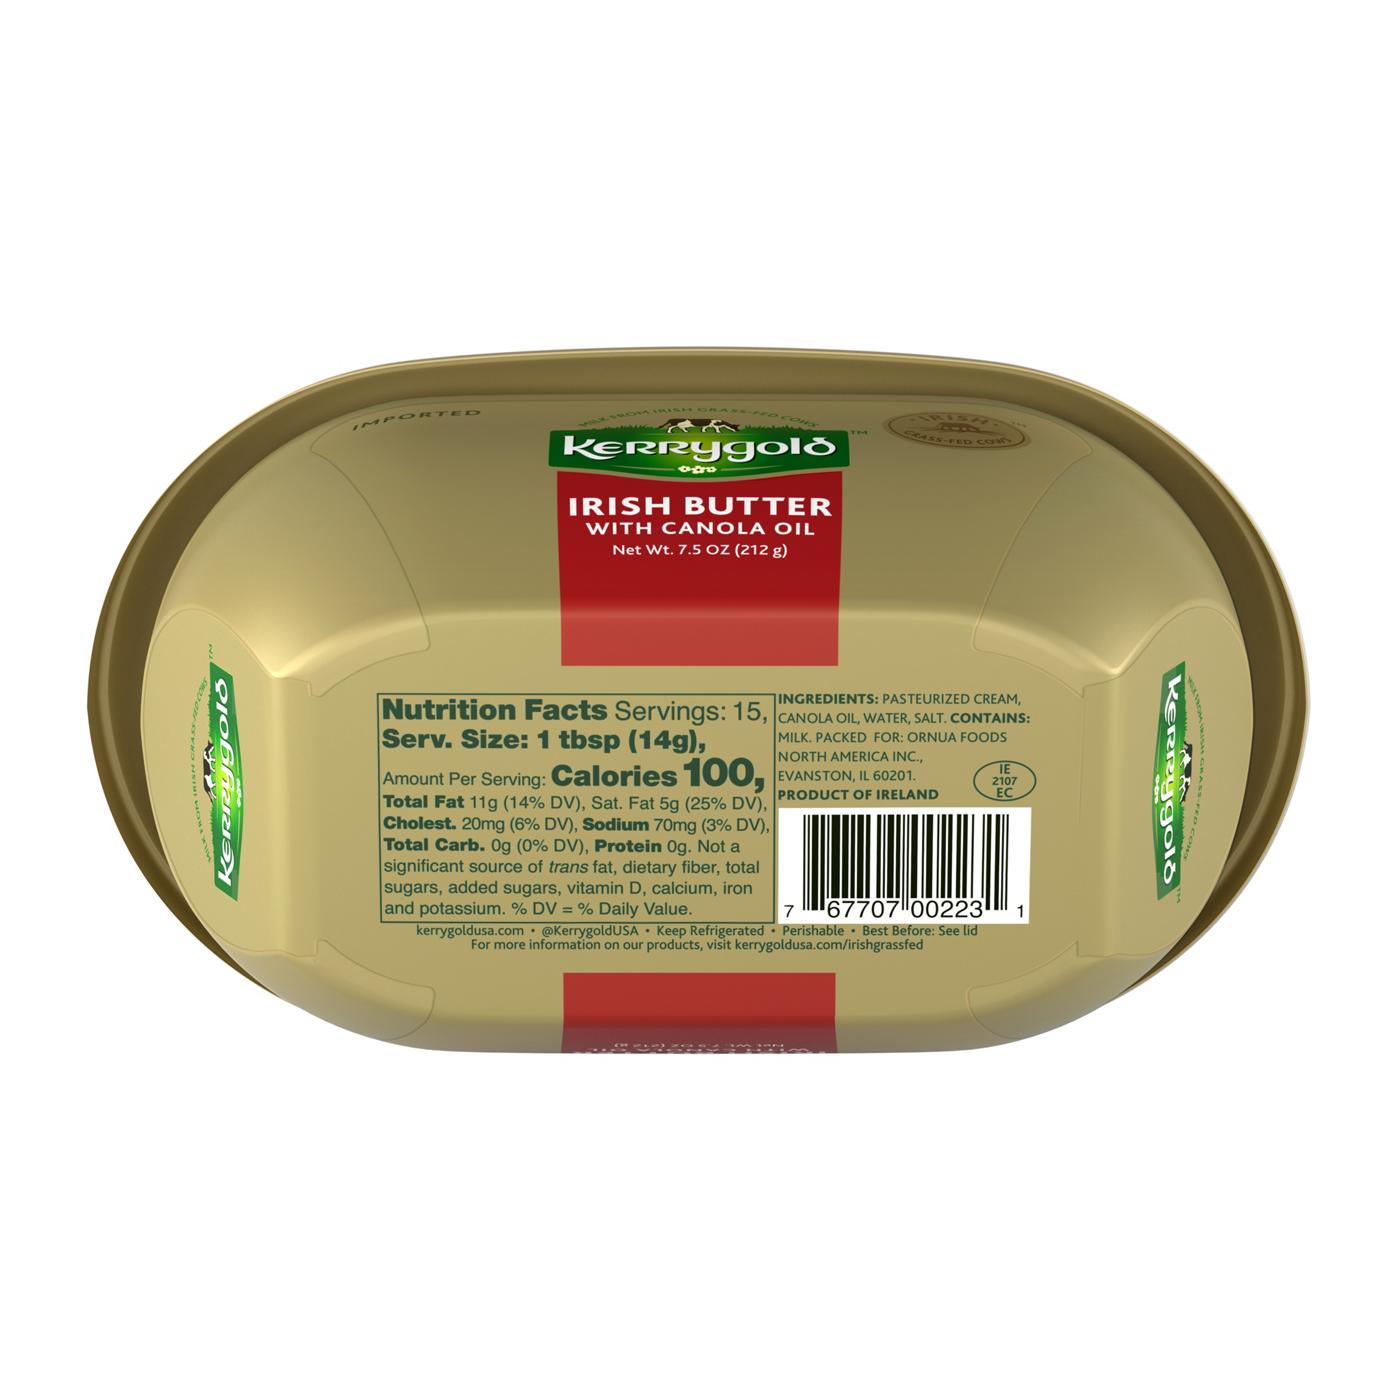 Kerrygold Grass-Fed Pure Irish Butter with Canola Oil; image 2 of 2